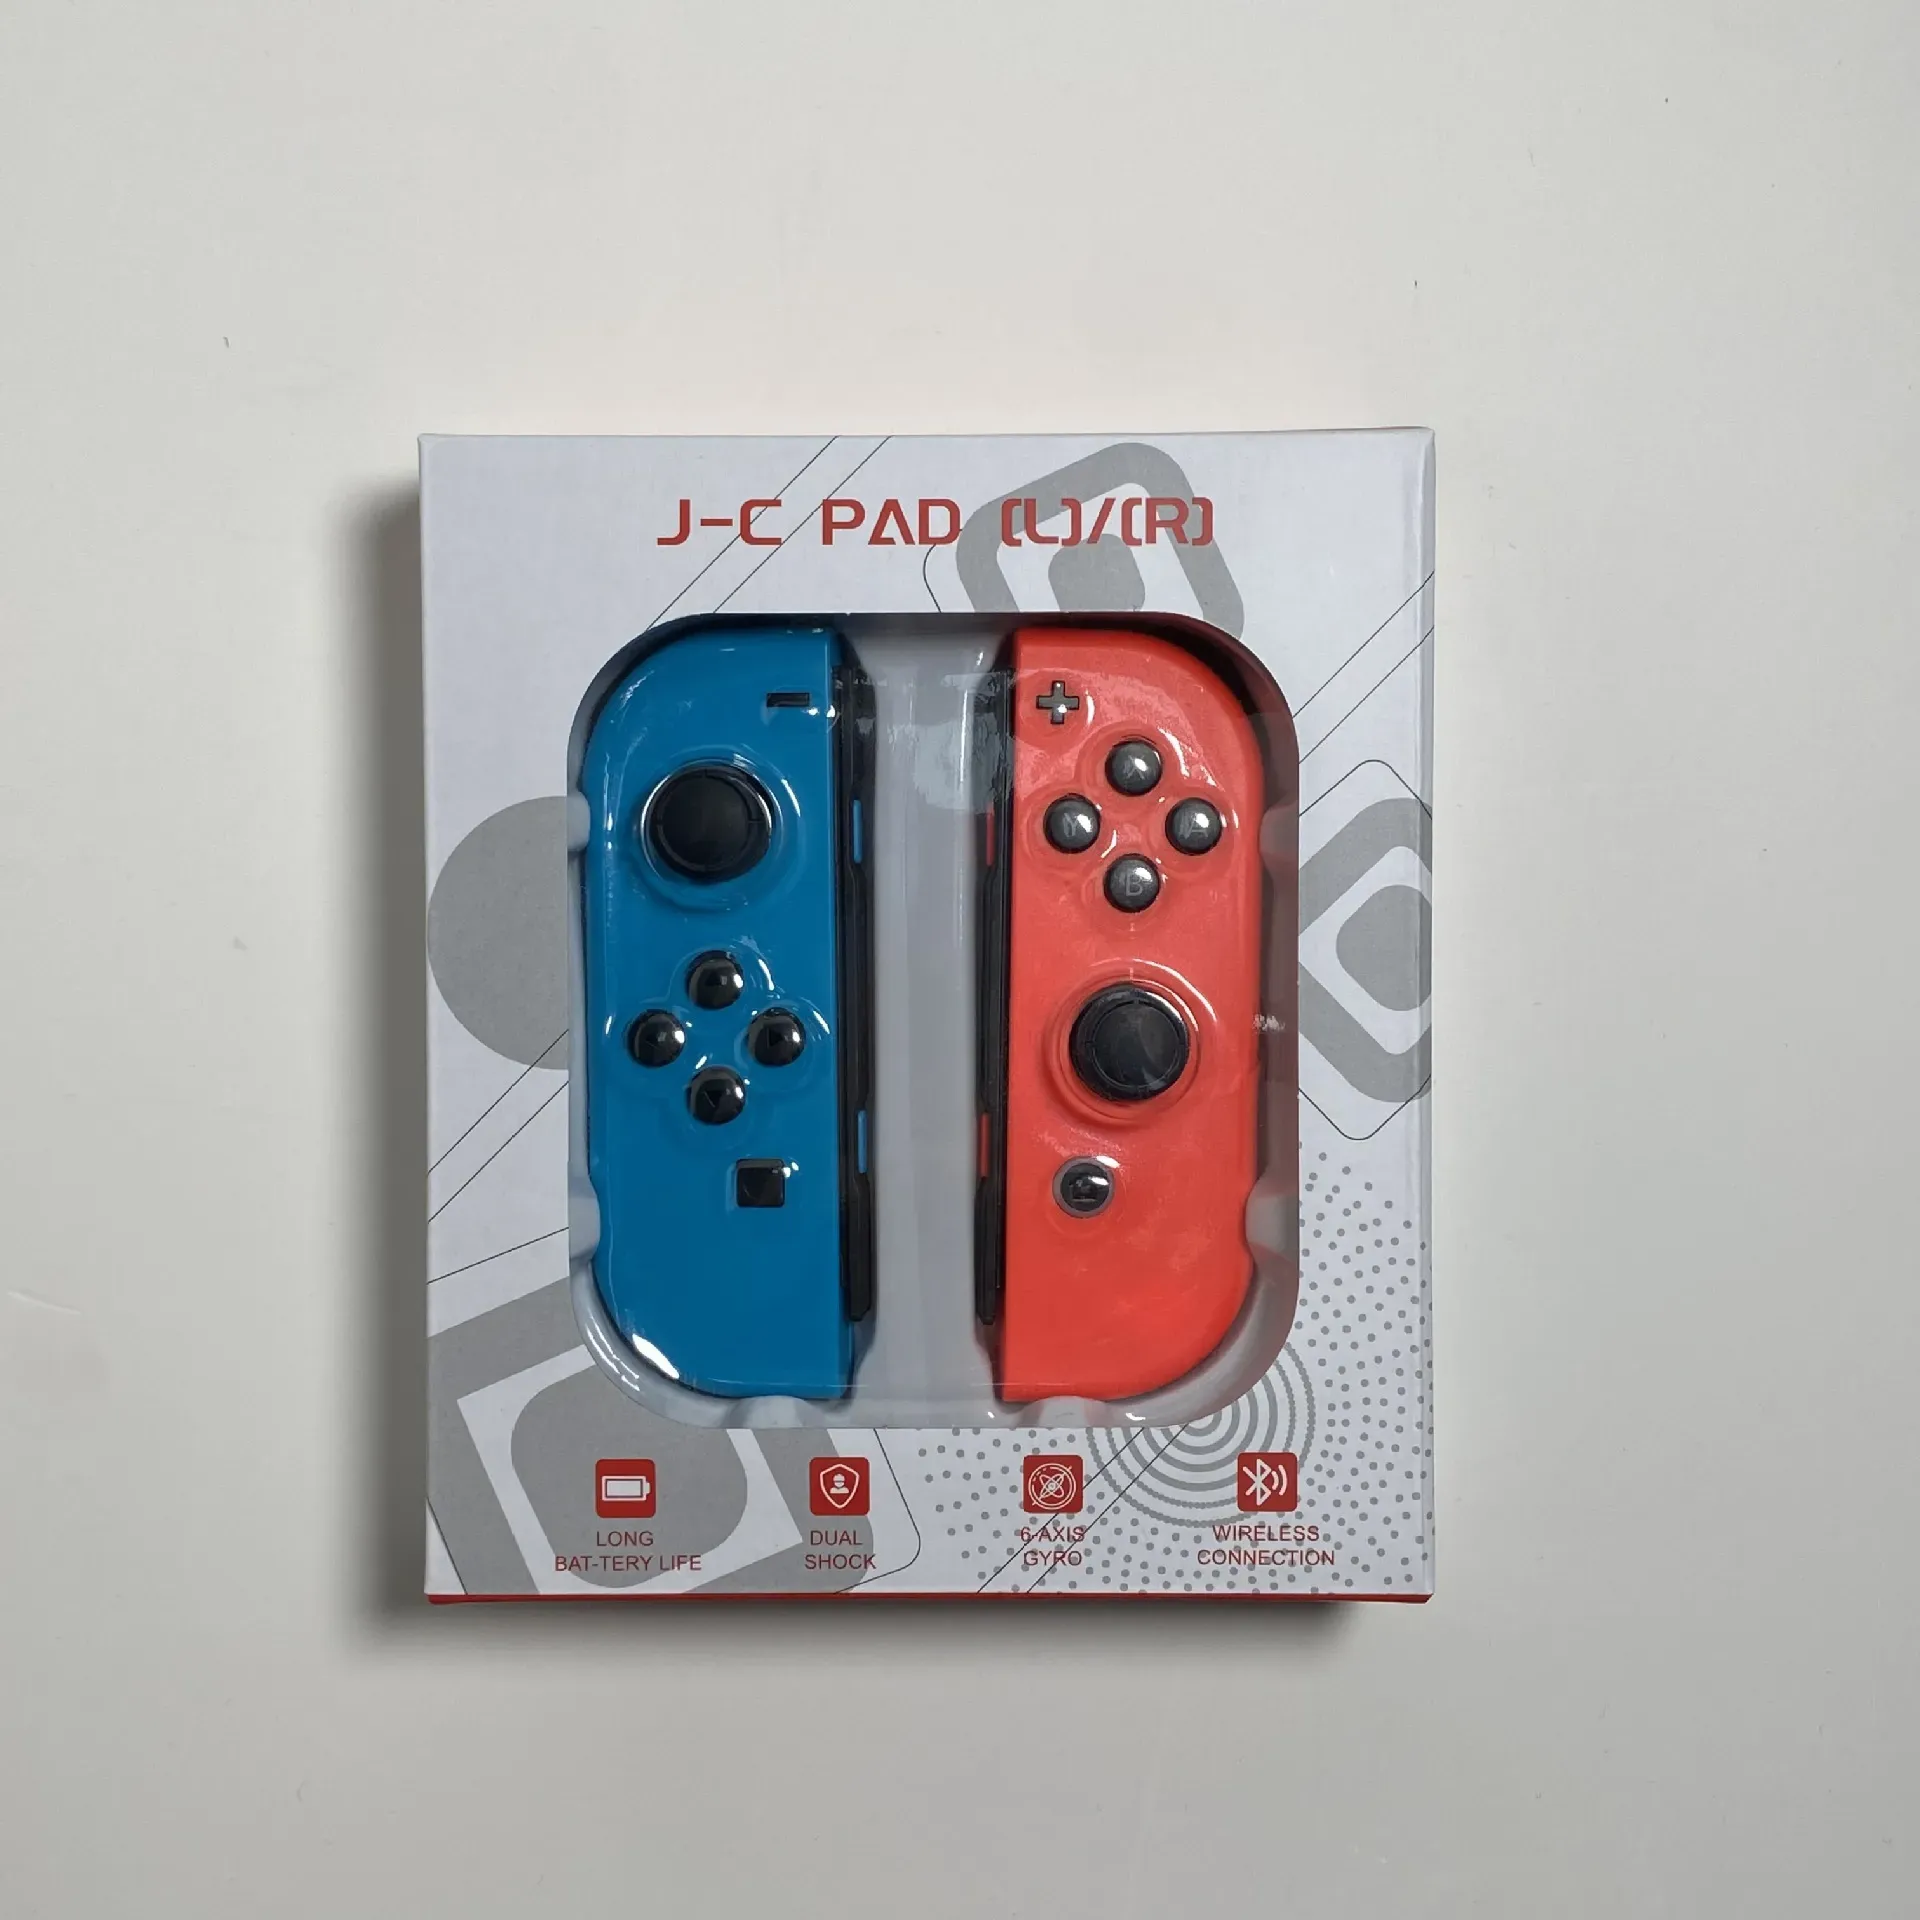 Wireless Bluetooth Gamepad Controller For Switch Console/NS Switch Gamepads Controllers Joystick/Nintendo Game Joy-Con With Retail Box